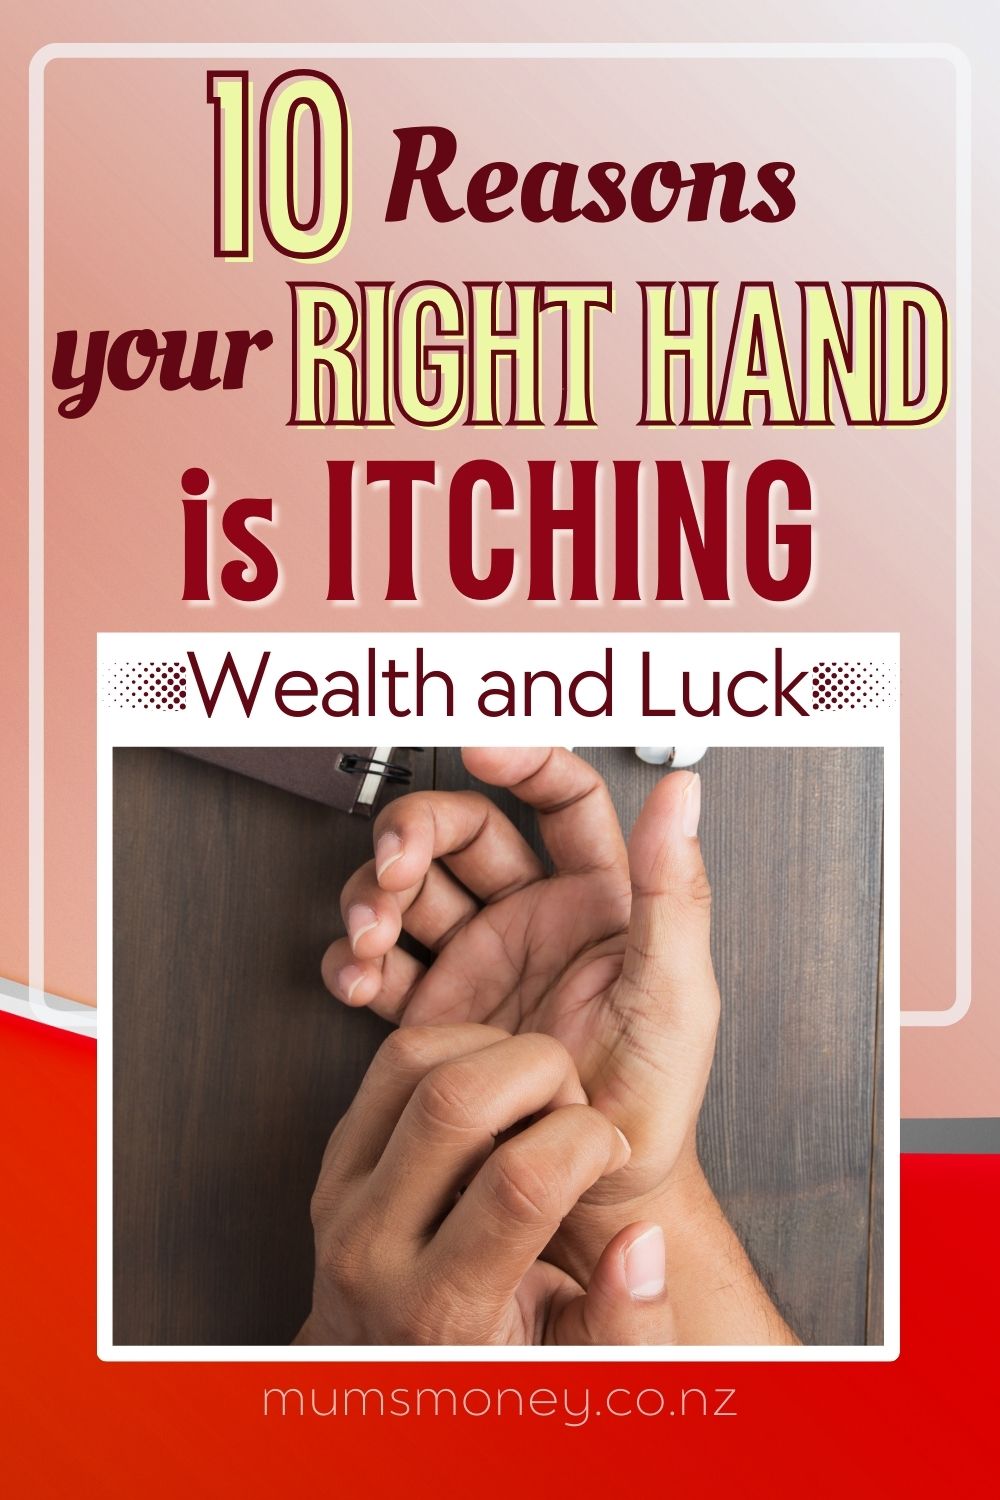 Image of a pair of hand with one hand scratching the palm.